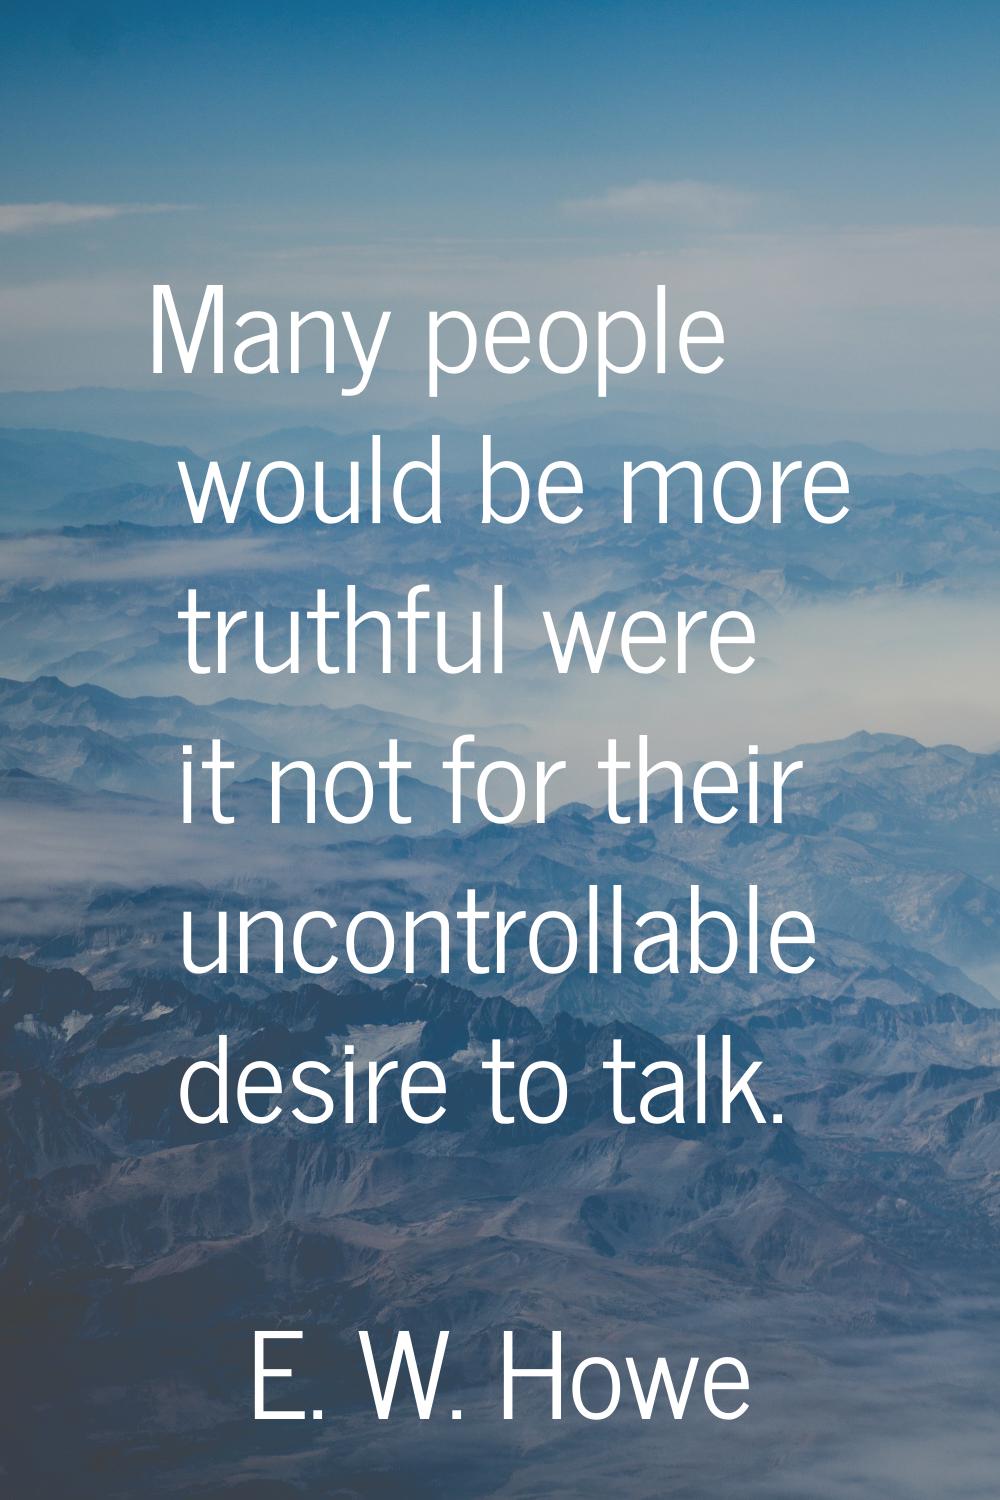 Many people would be more truthful were it not for their uncontrollable desire to talk.